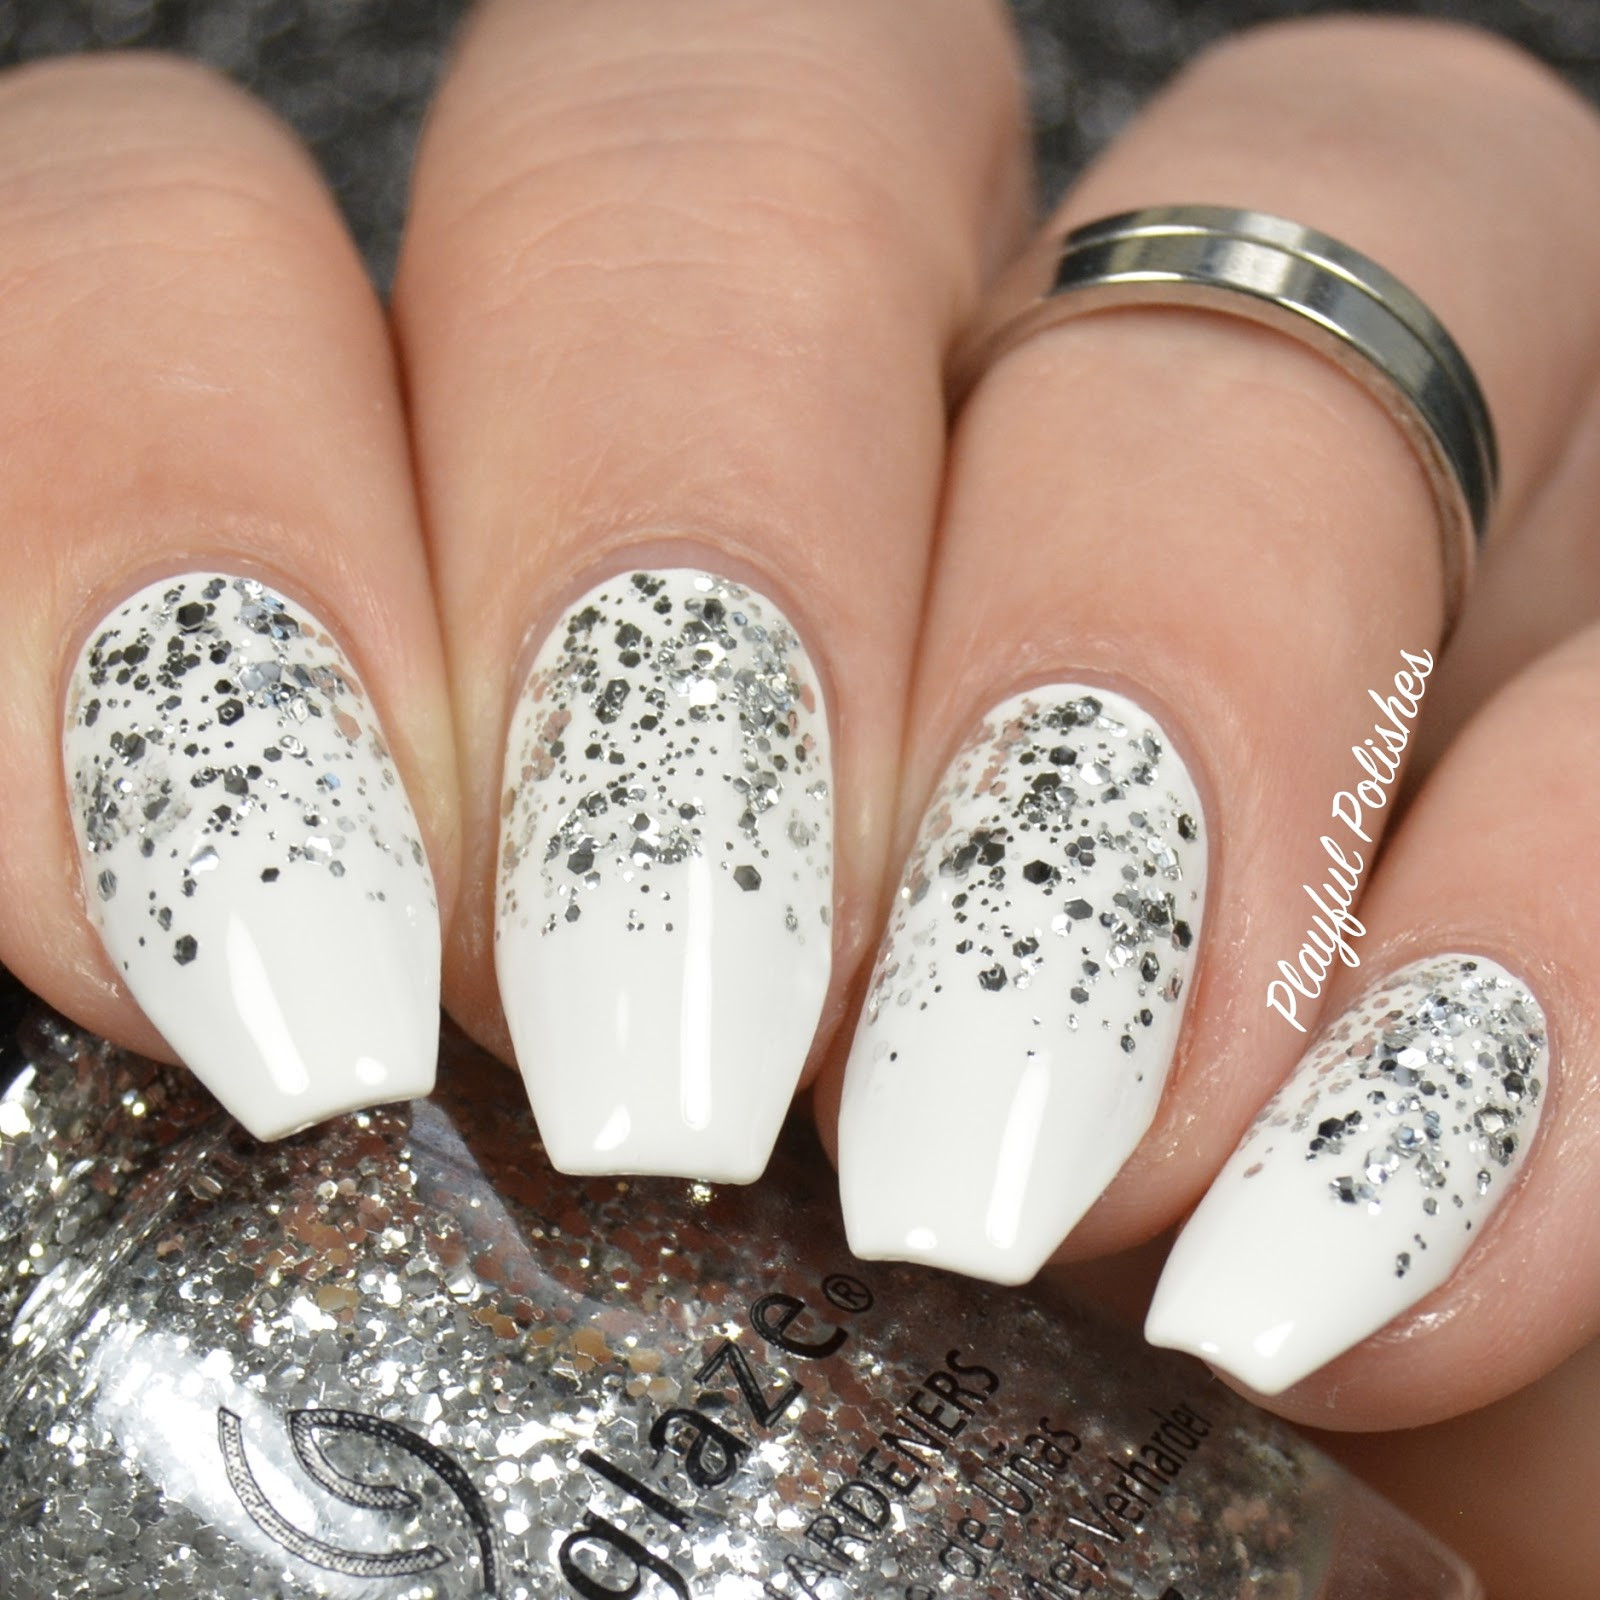 Nail Designs For New Years
 Playful Polishes 3 SIMPLE & ELEGANT NEW YEARS NAIL DESIGNS